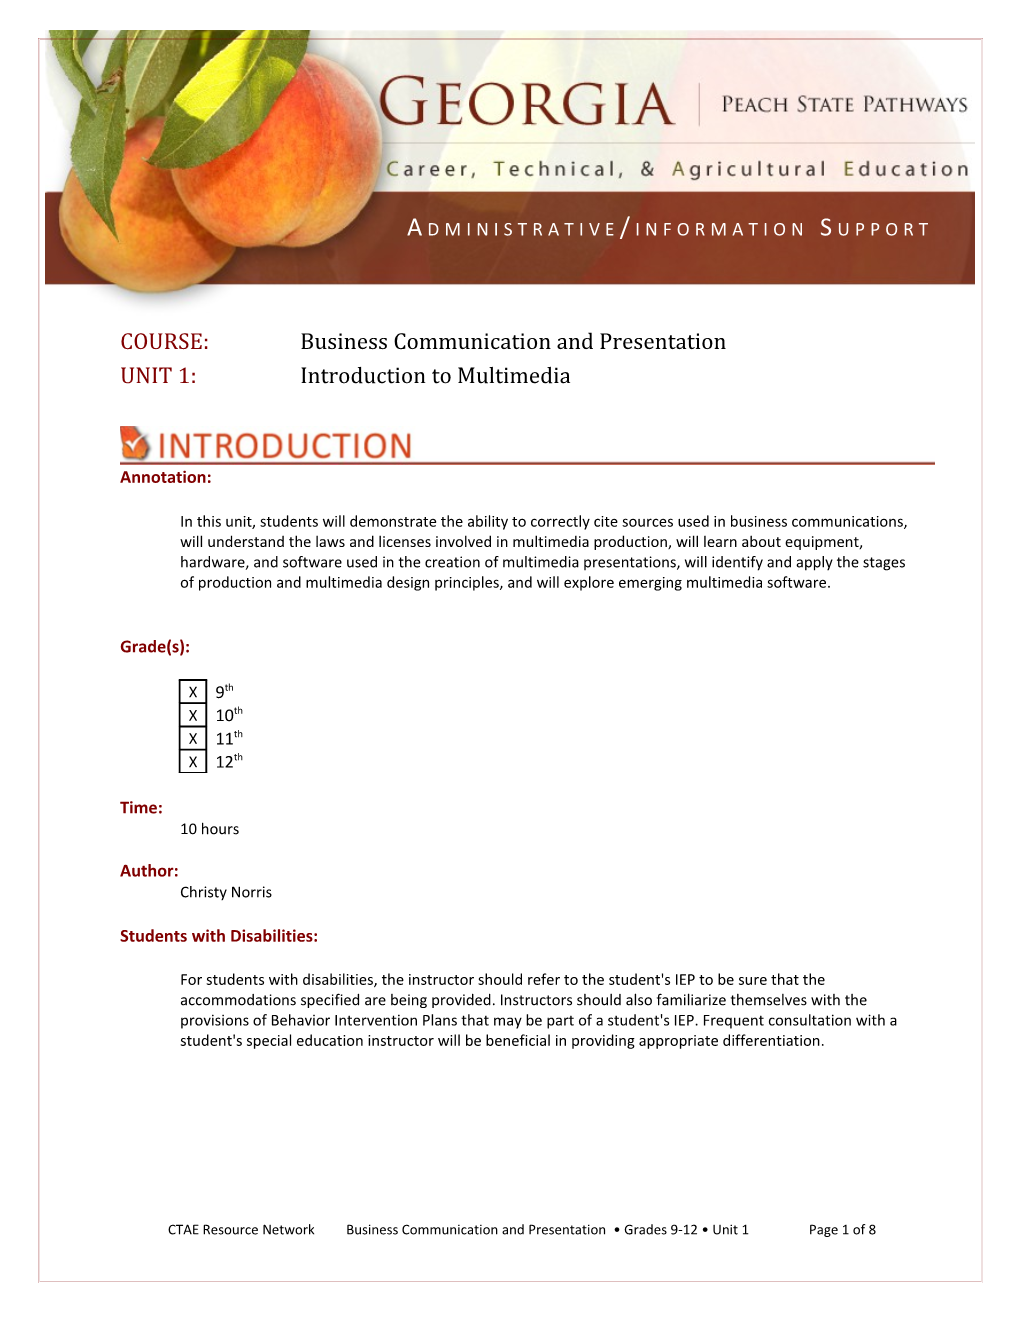 COURSE: Business Communication and Presentation